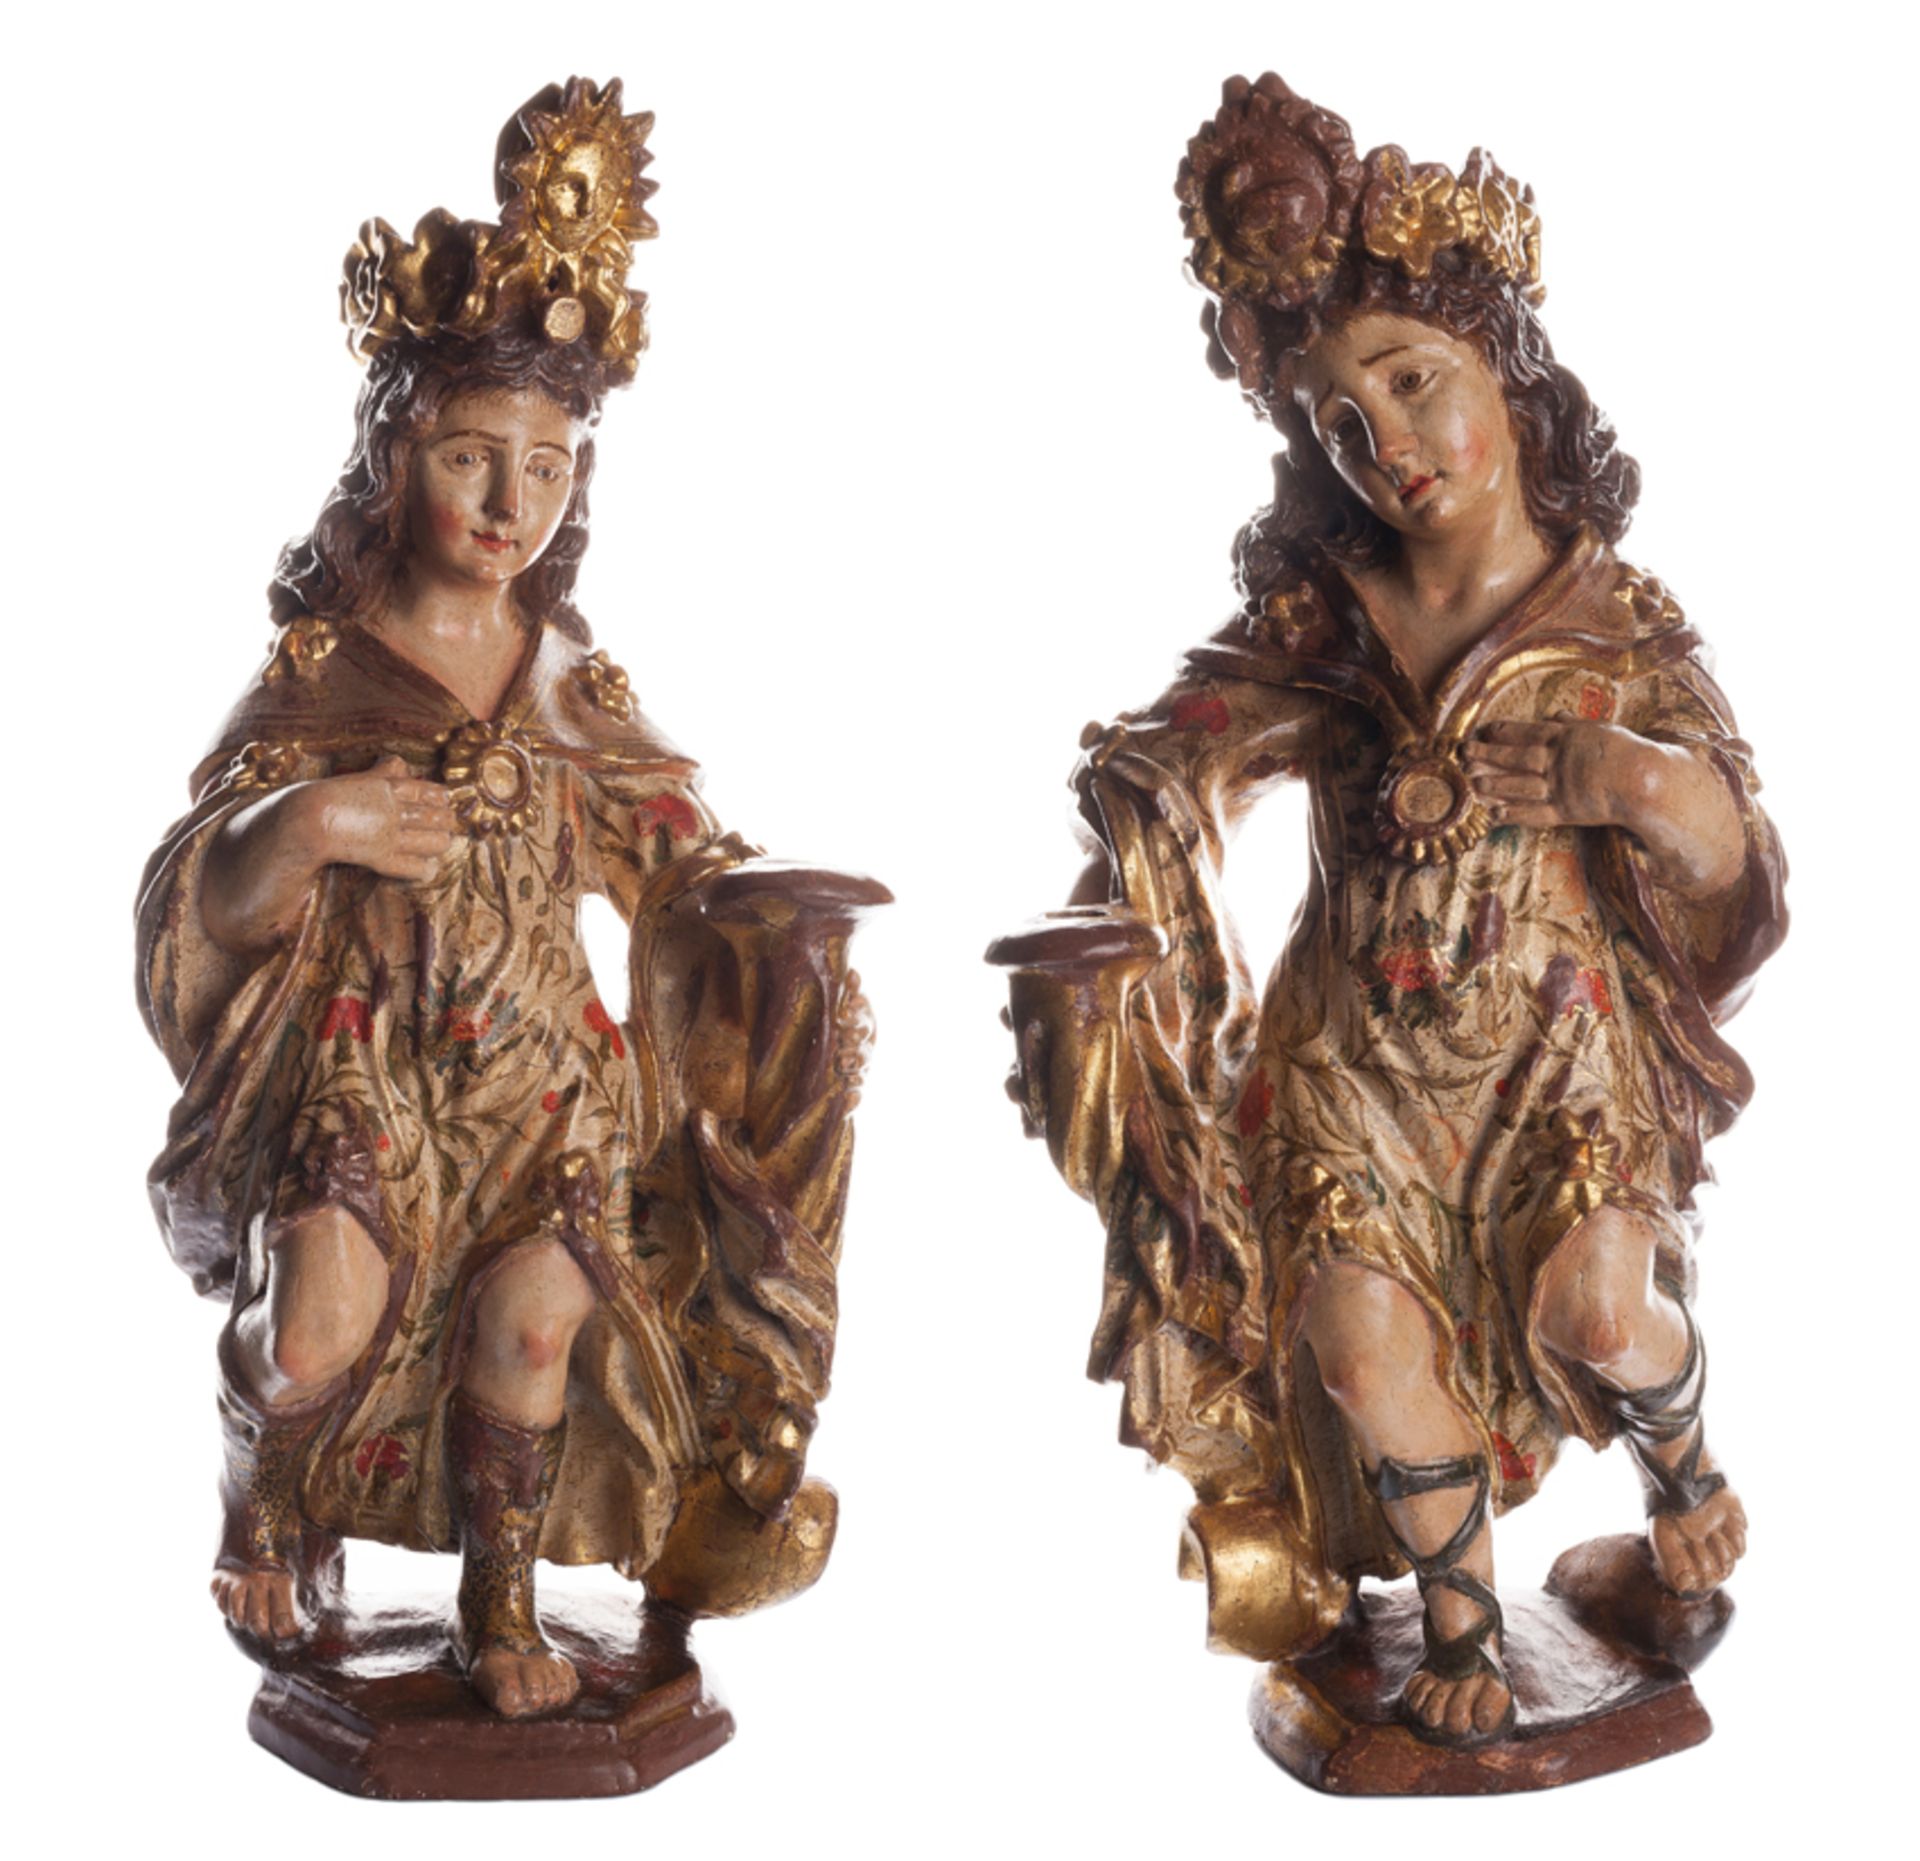 Imposing pair of angels in carved, gilded and polychromed wood. Viceroyalty of Peru. 17th - 18th cen